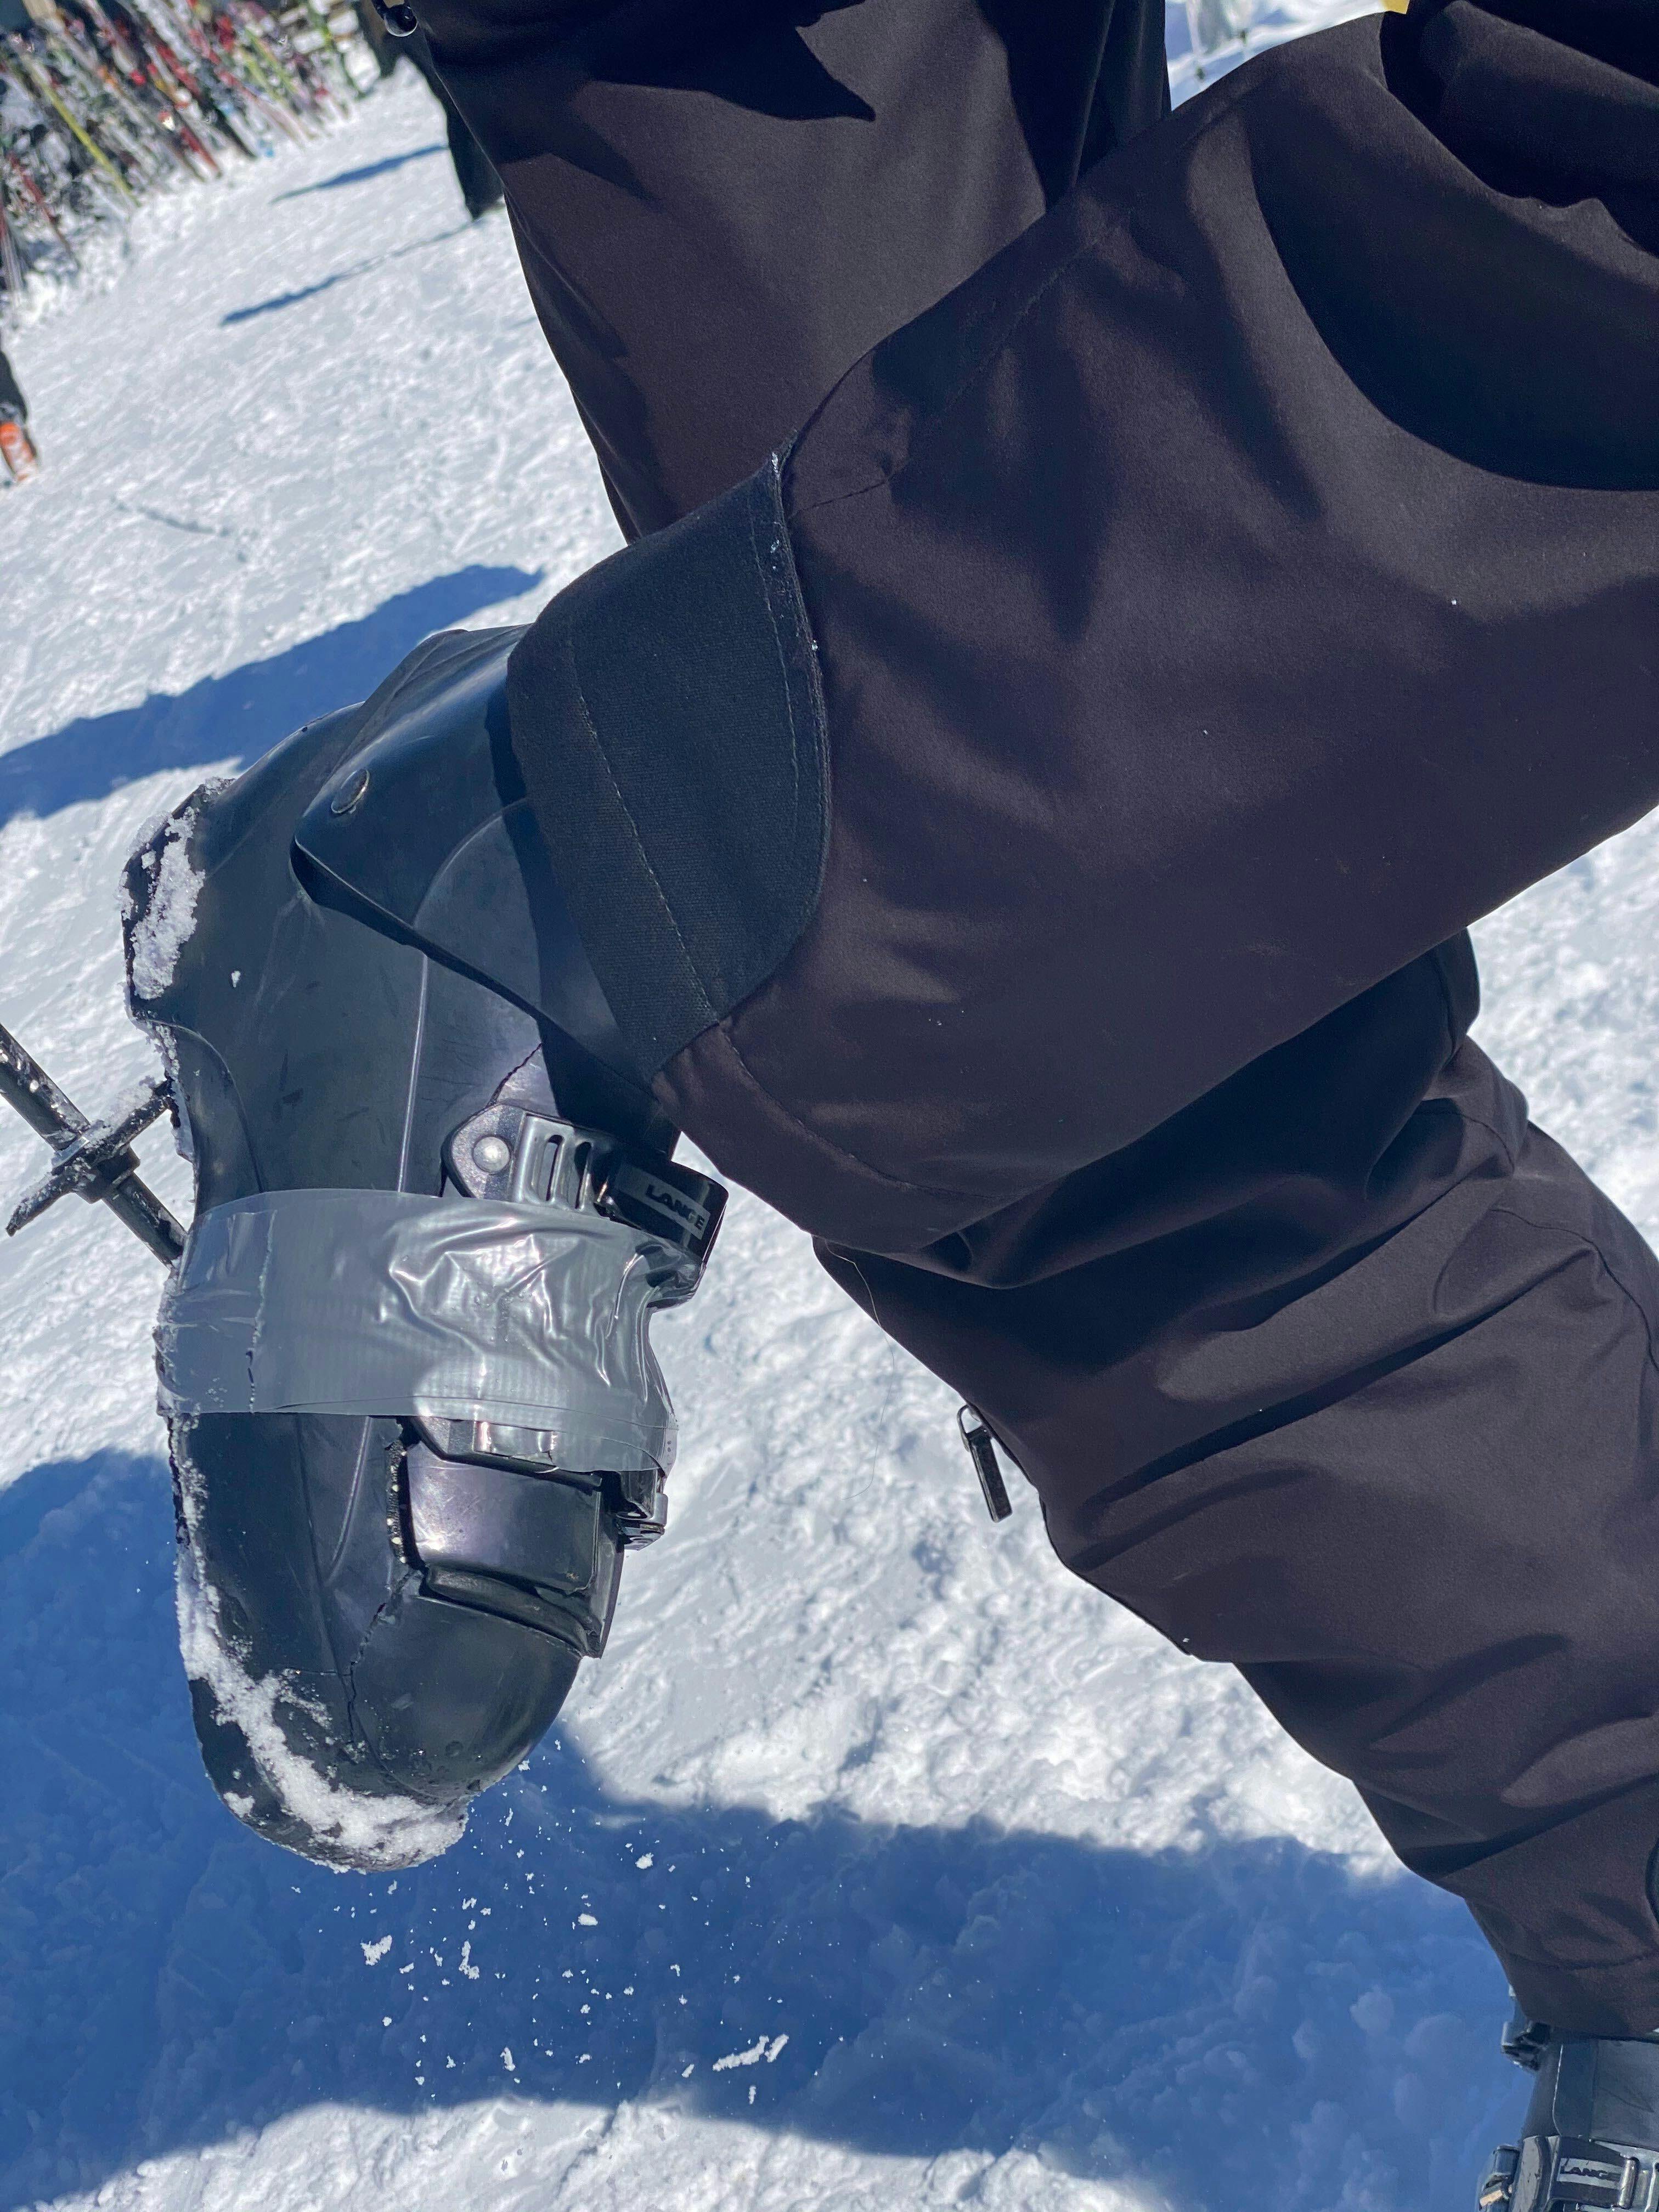 A person shows off their ski boots, which have been wrapped with duct tape